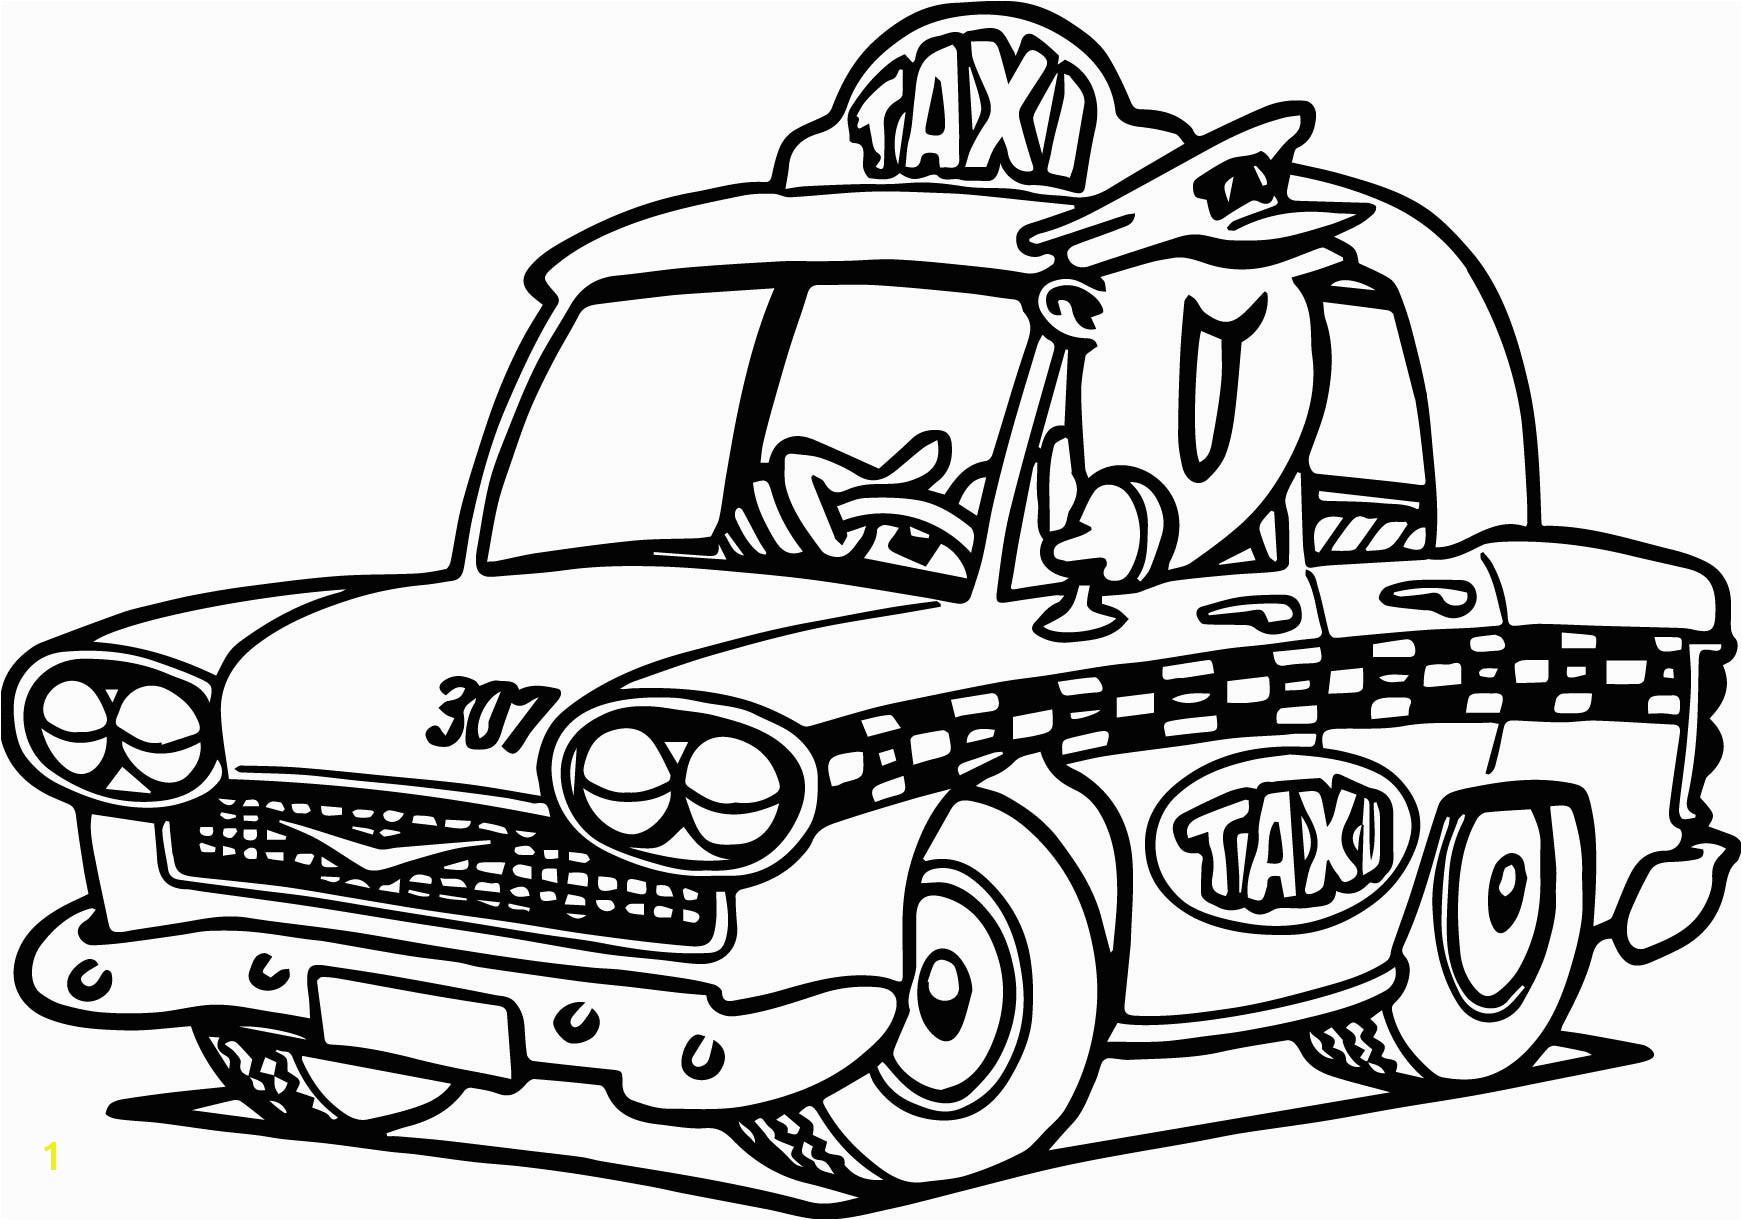 Taxi Coloring Page Taxi Driver Car Cartoon Coloring Page Transportation Pages for Kids